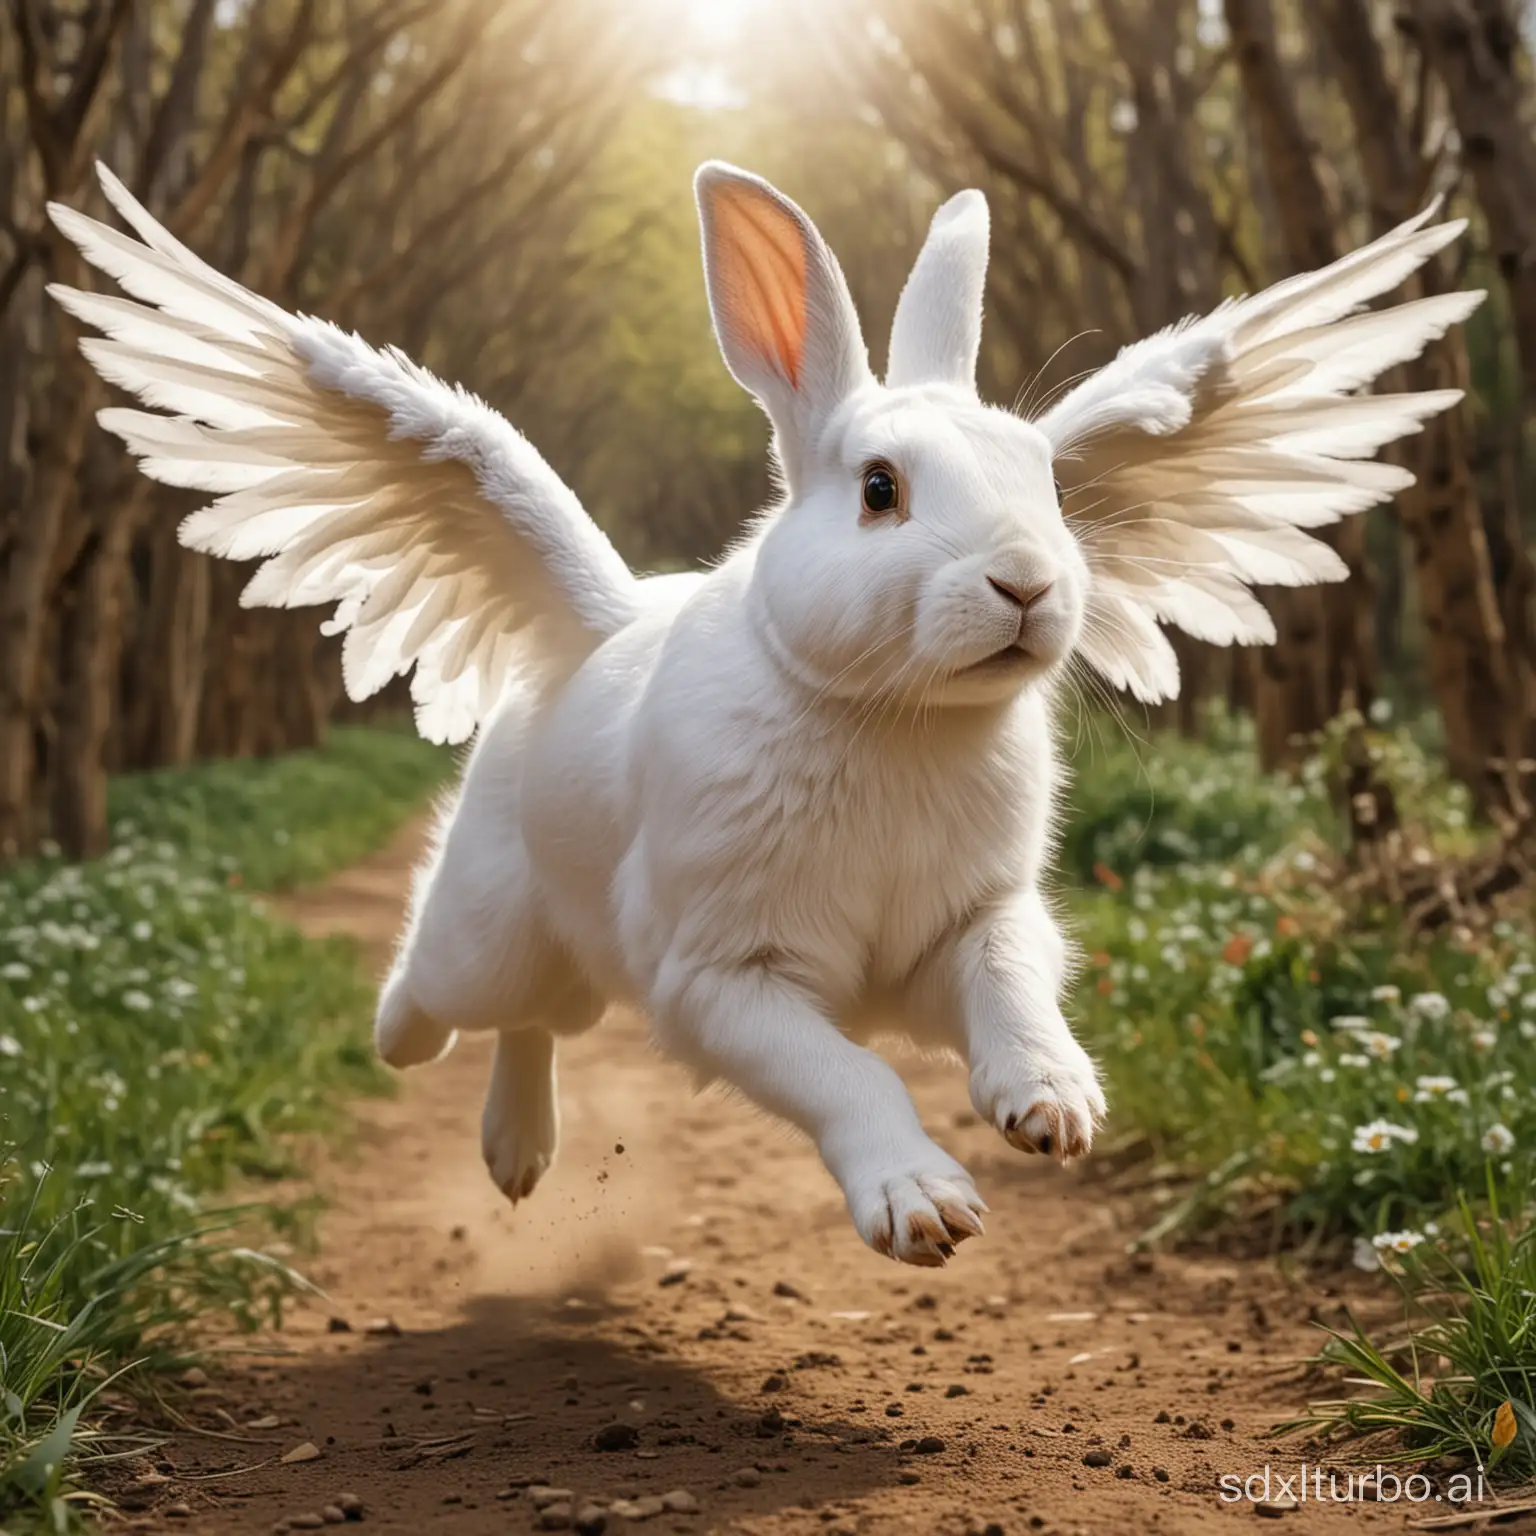 The running rabbit, with wings